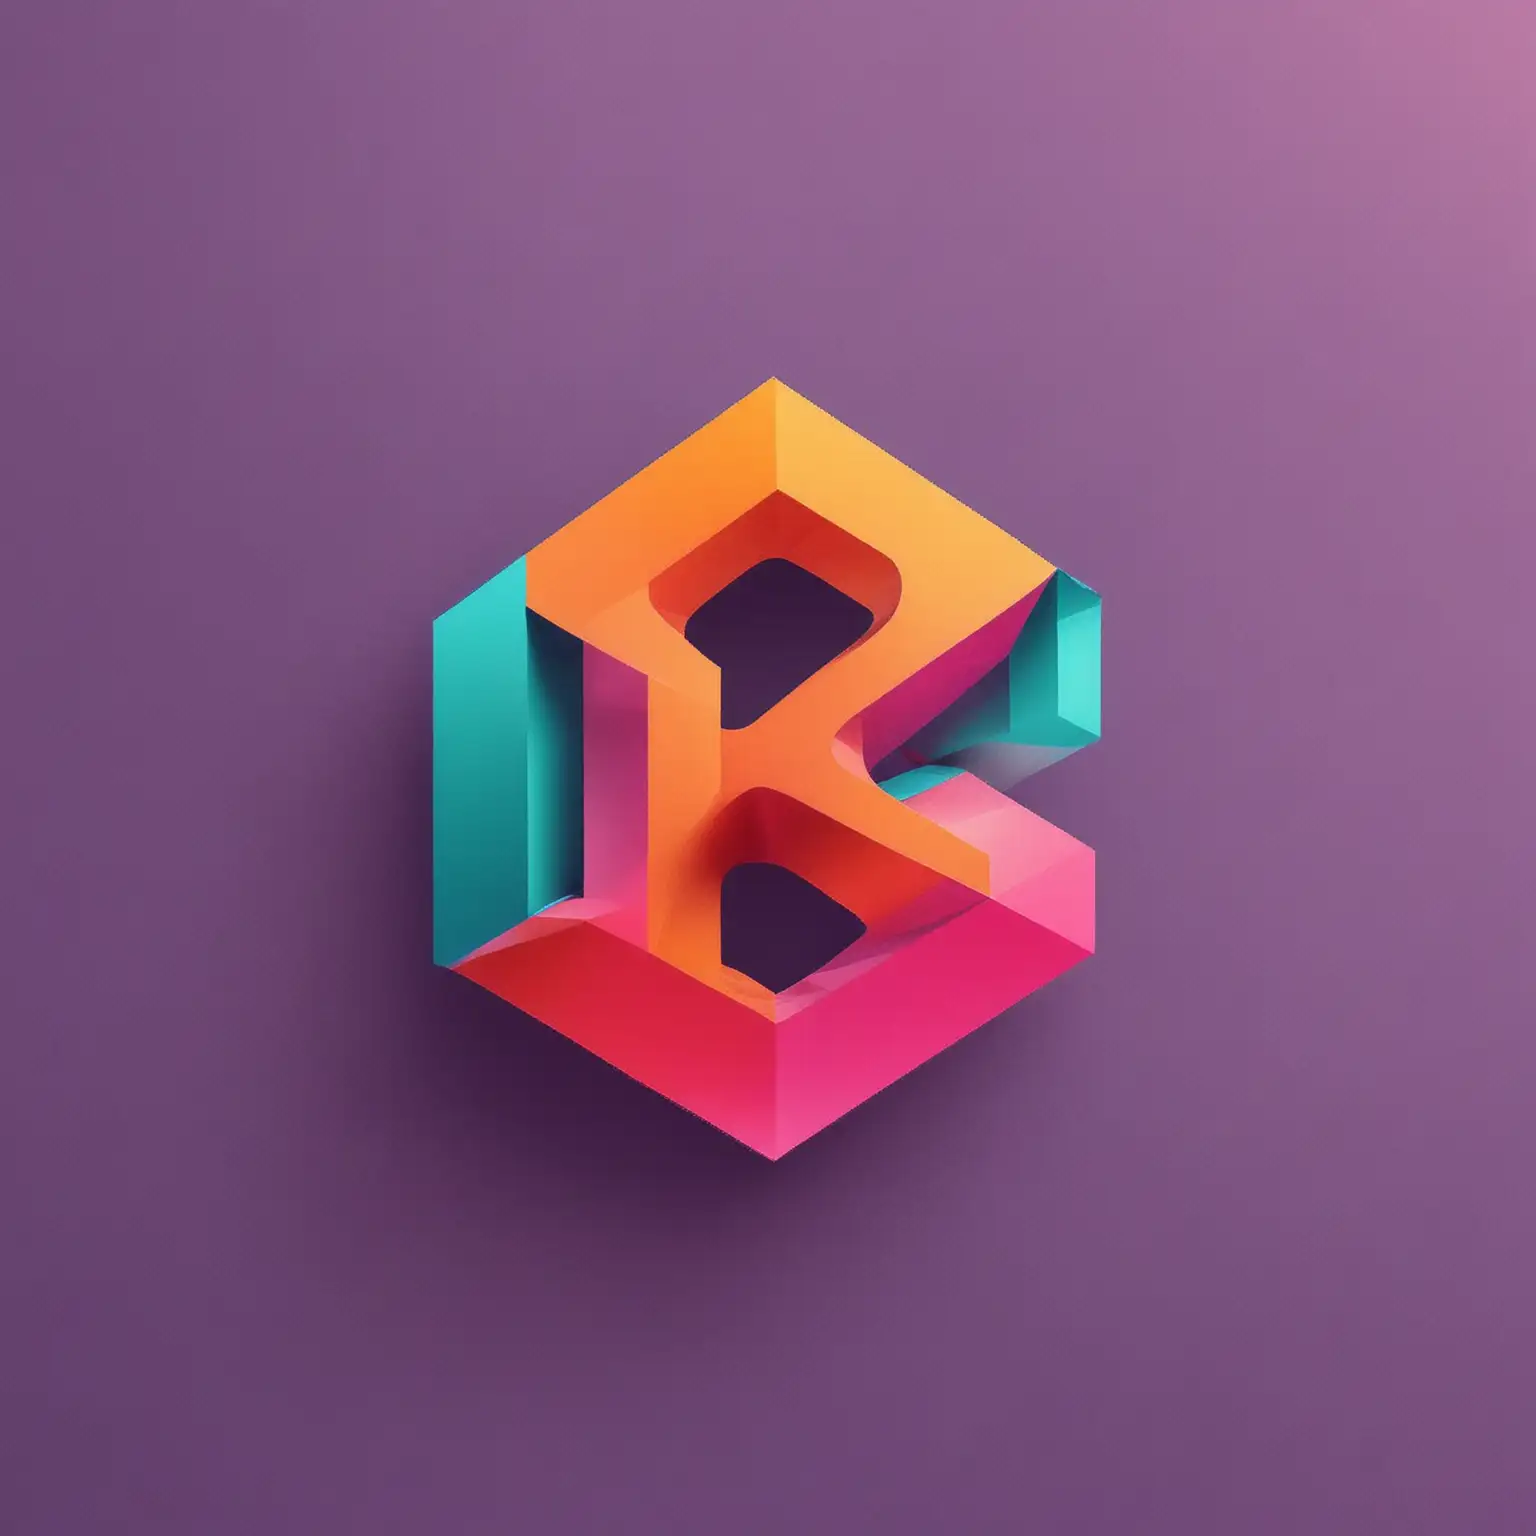 clean and simple business logo using geometric shape to form letter B. colors highlighted orange, pink, teal, purple. inspired by the idea of bright minds, technology, and education -ar 2:3 --sref https://s.mj.run/87Sjf94hFiI ::1.5 <https://s.mj.run/BdQFQve9VPQ>